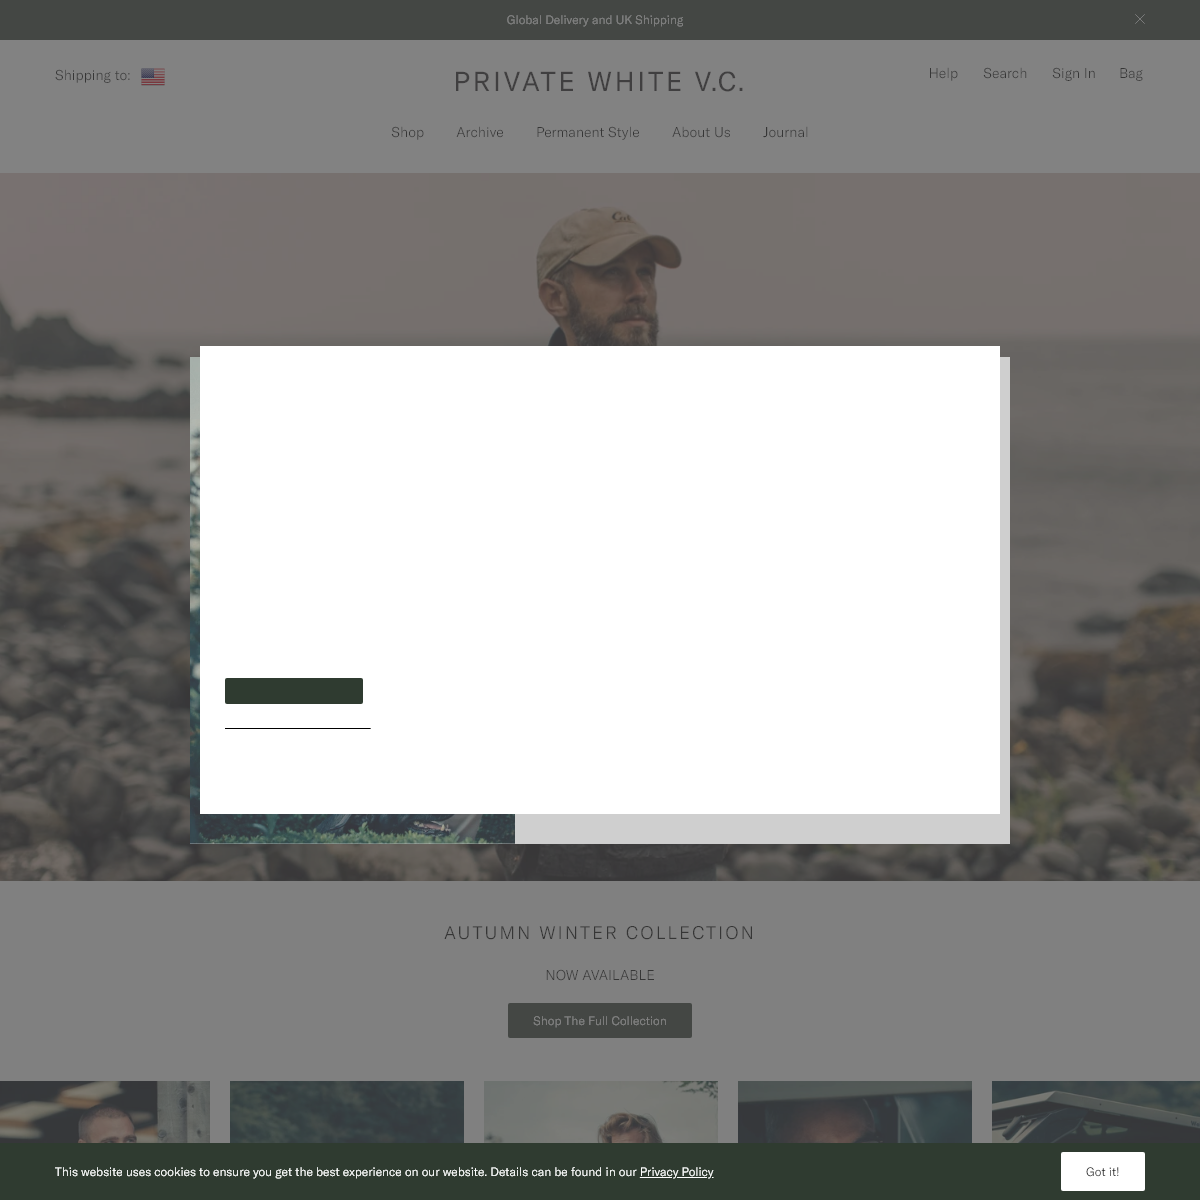 A complete backup of privatewhitevc.com